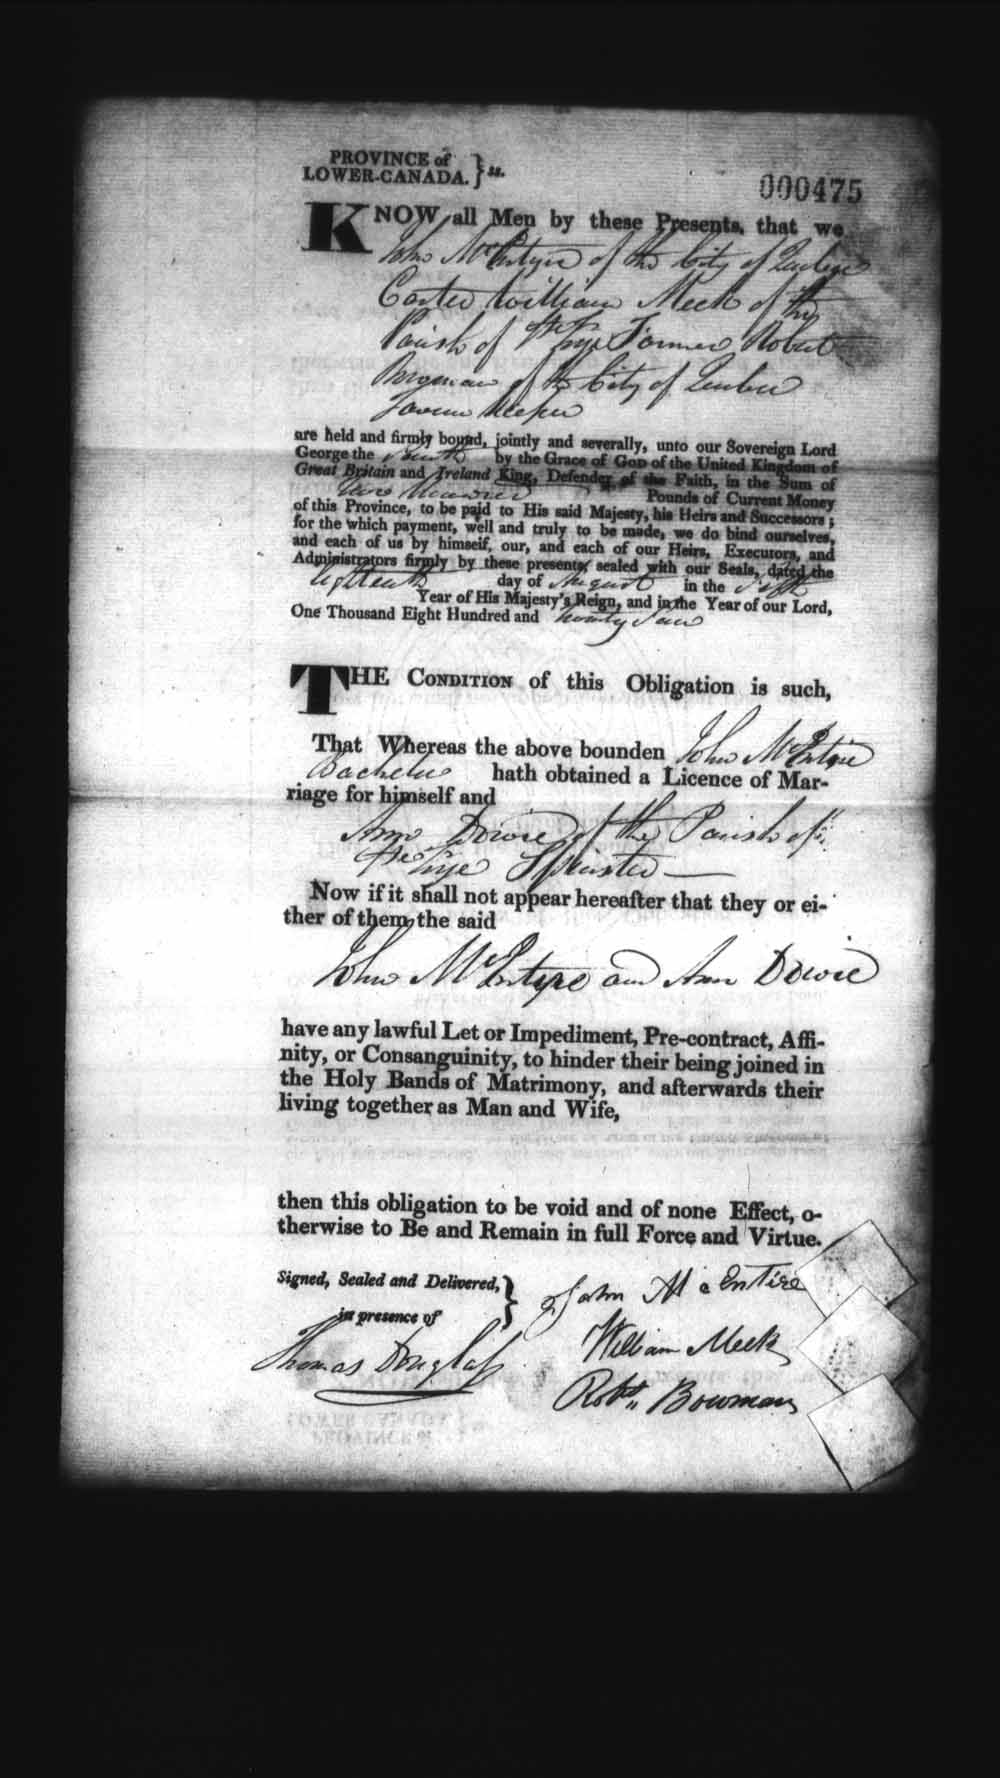 Digitized page of Upper and Lower Canada Marriage Bonds (1779-1865) for Image No.: e008236386